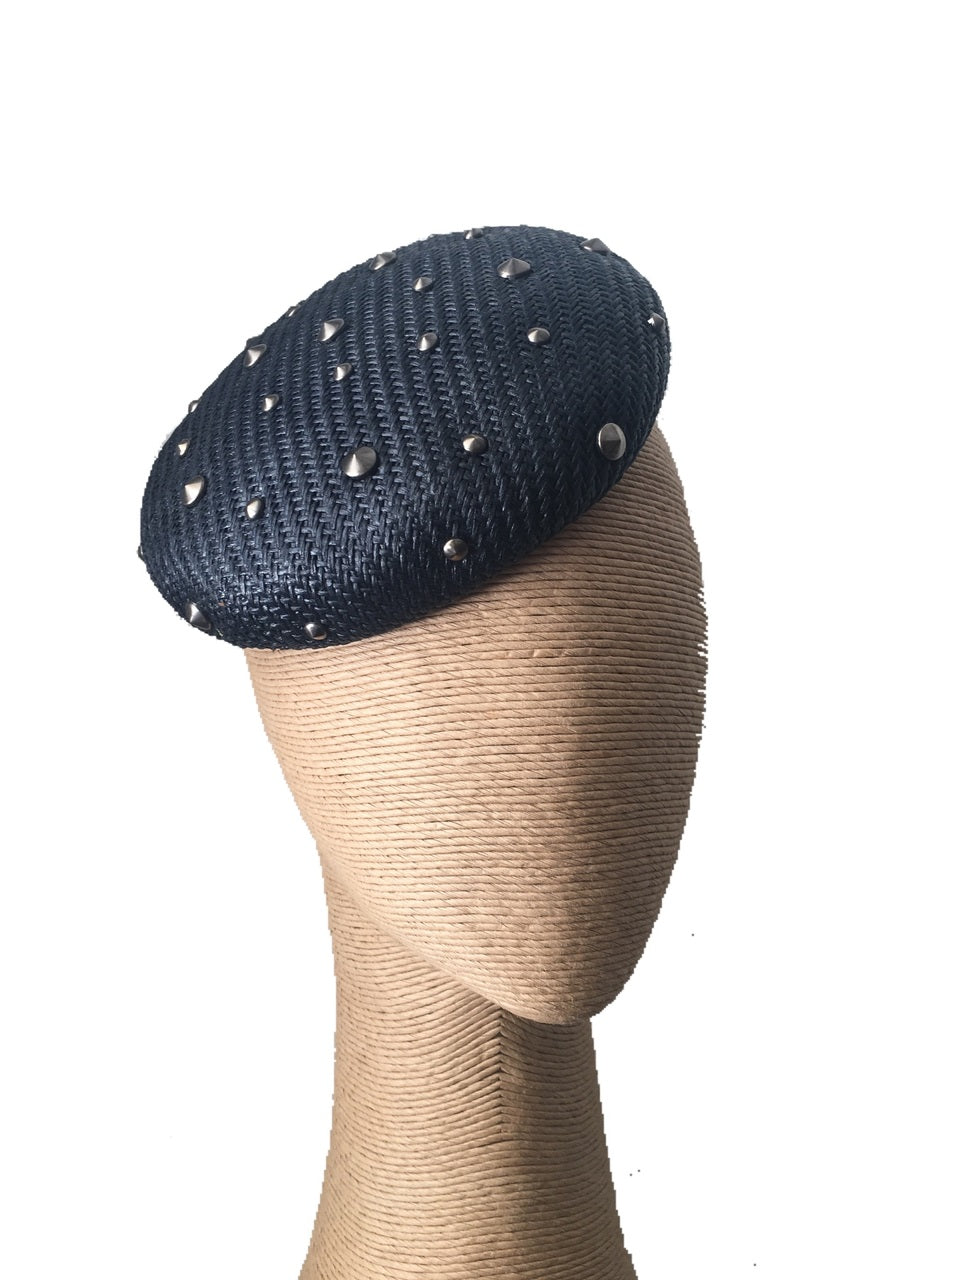 Max Alexander Susie Hat with Studs in Navy